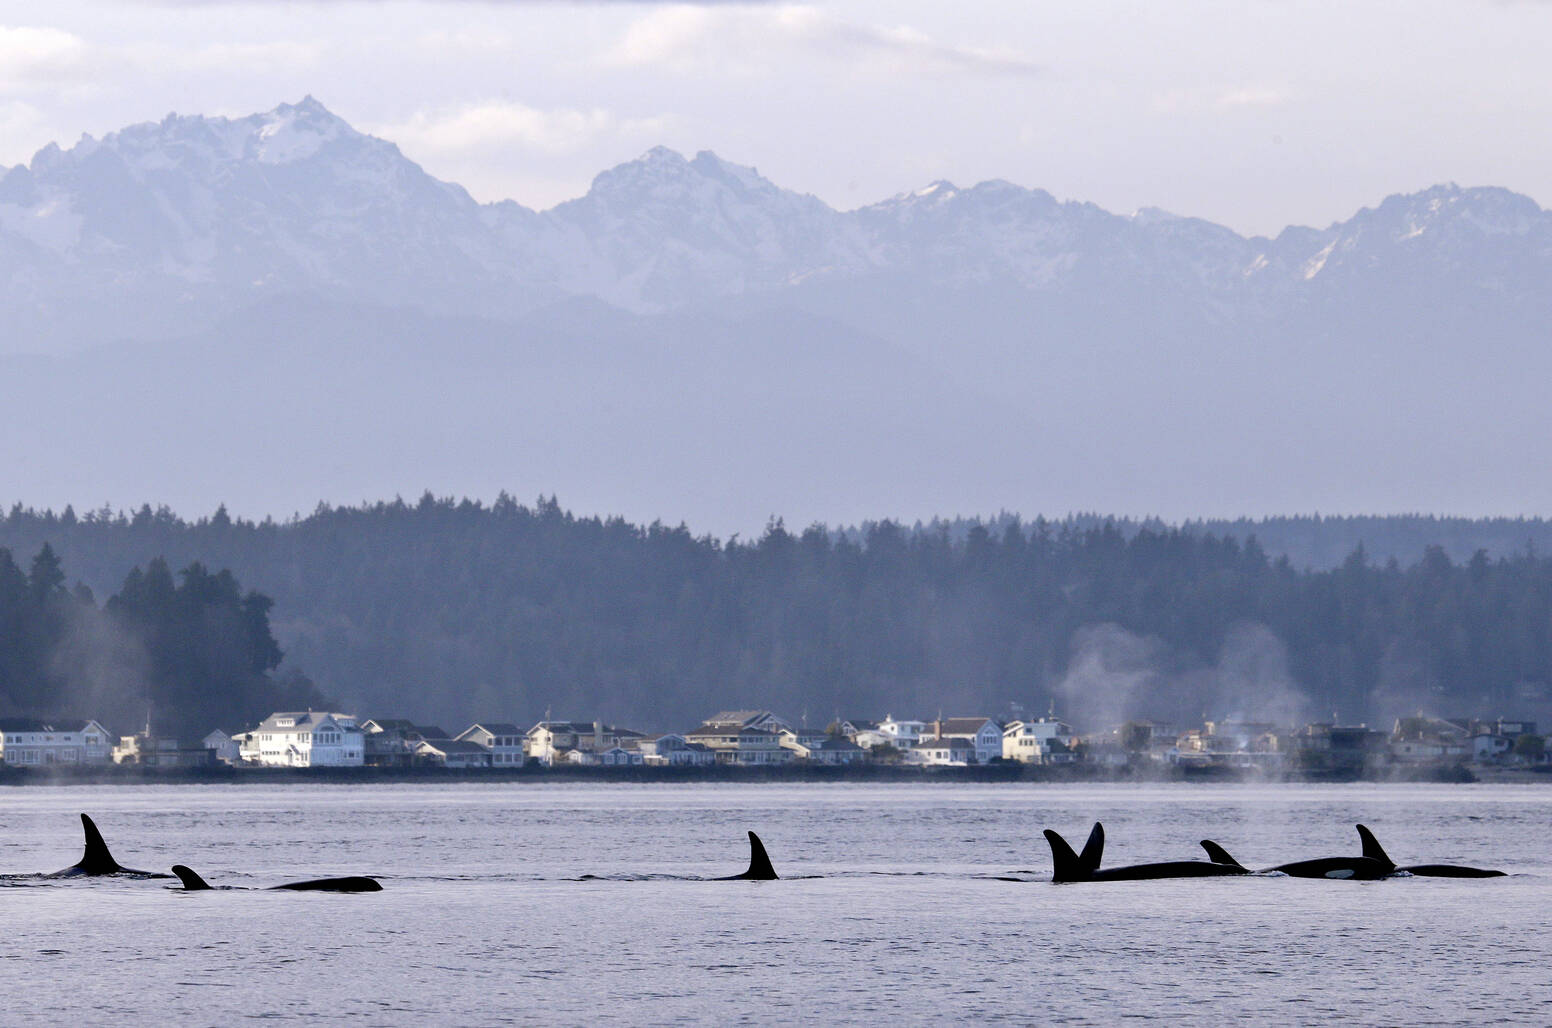 In this Jan. 18, 2014, file photo, endangered orcas swim in Puget Sound and in view of the Olympic Mountains just west of Seattle, as seen from a federal research vessel that has been tracking the whales. A federal court ruling this week has thrown into doubt the future of a valuable commercial king salmon fishery in Southeast Alaska, after a conservation group challenged the government's approval of the harvest as a threat to protected fish and the endangered killer whales that eat them. (AP Photo / Elaine Thompson)